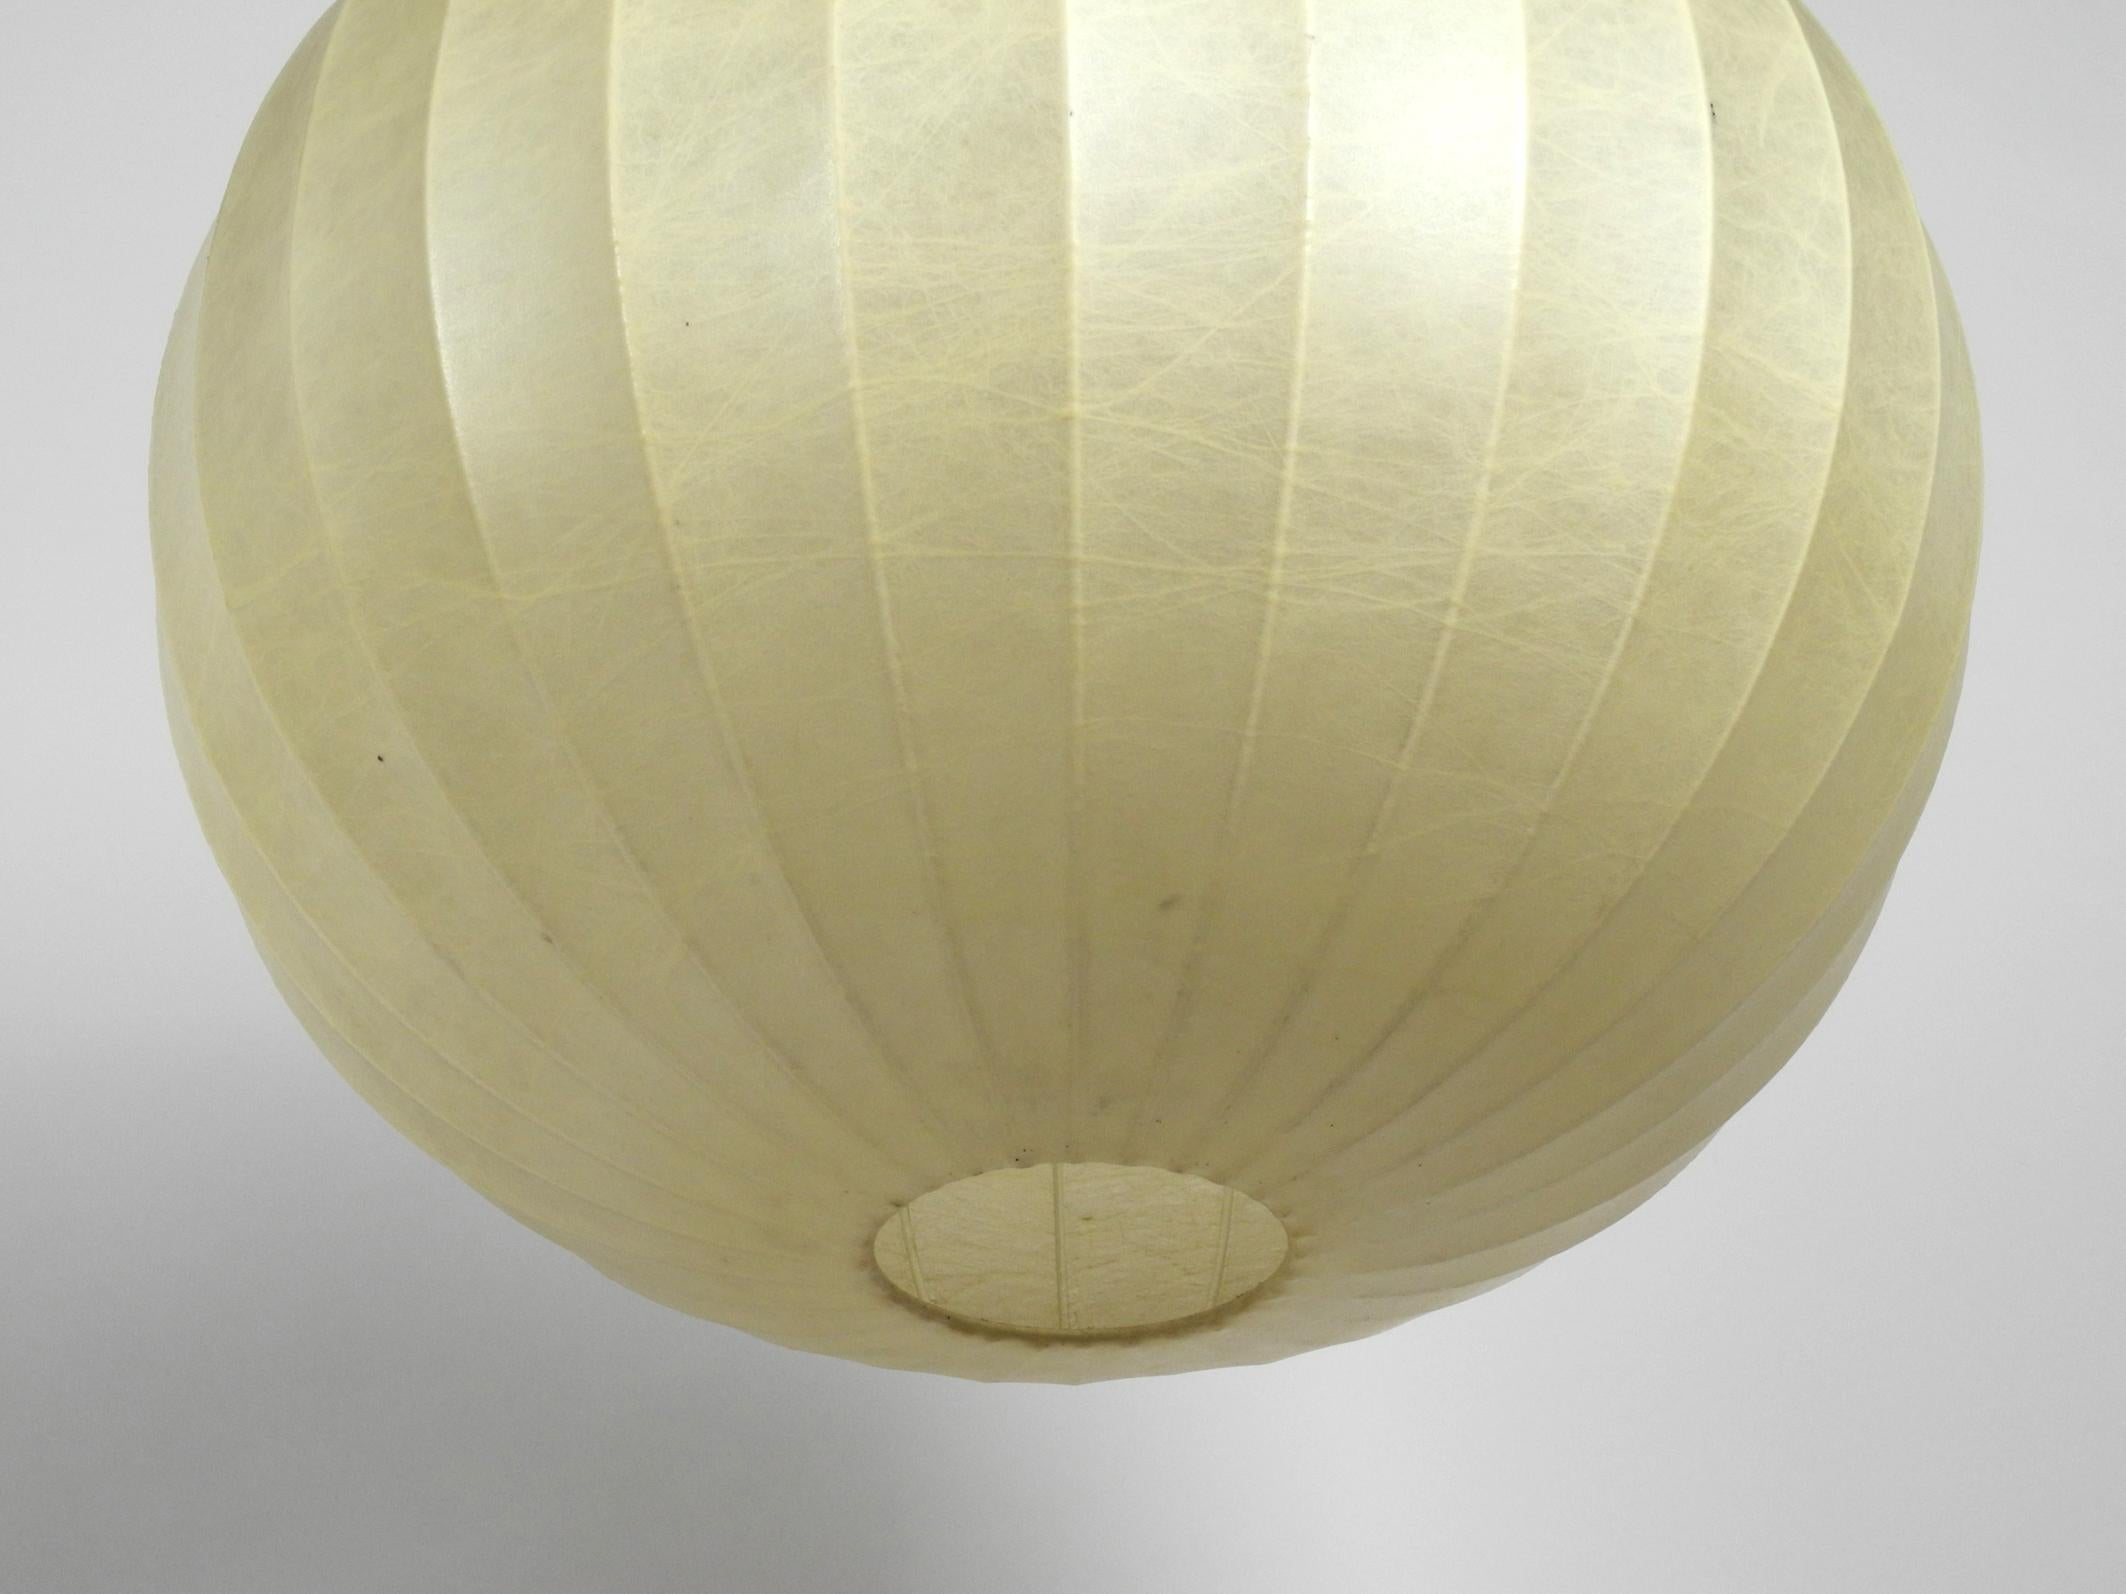 German Extra Large Cocoon Big Ball Ceiling Lamp in Very Good Original Vintage Condition